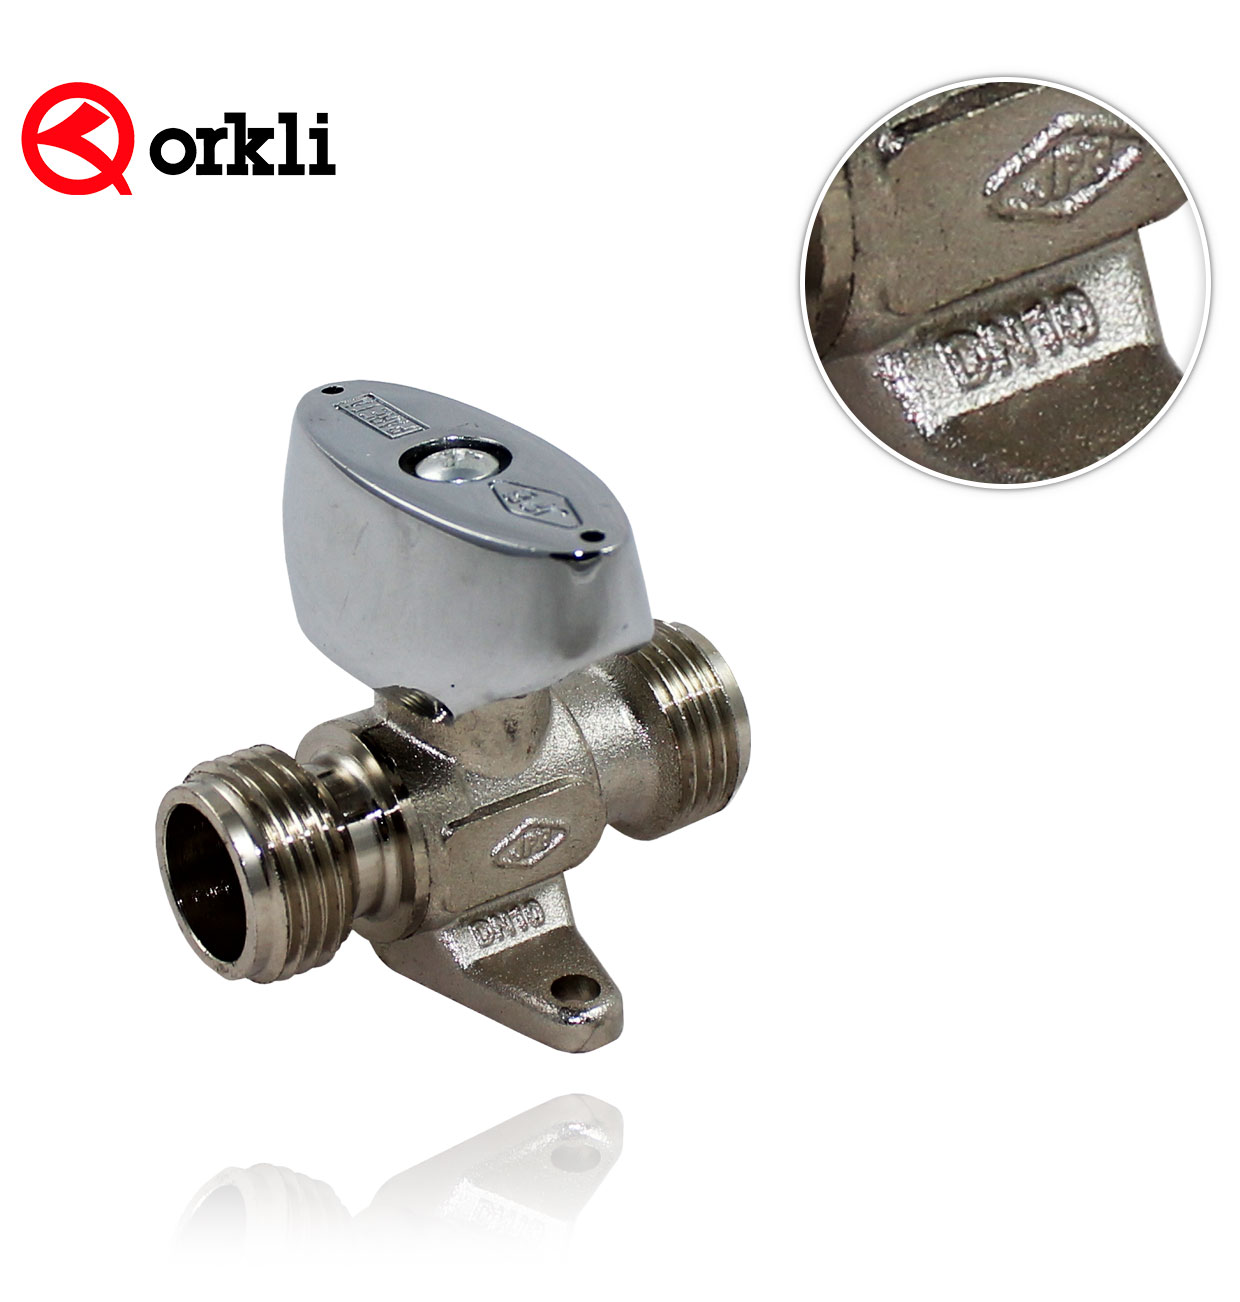 1/2" MM nickel-plated natural gas VALVE WITH FEET